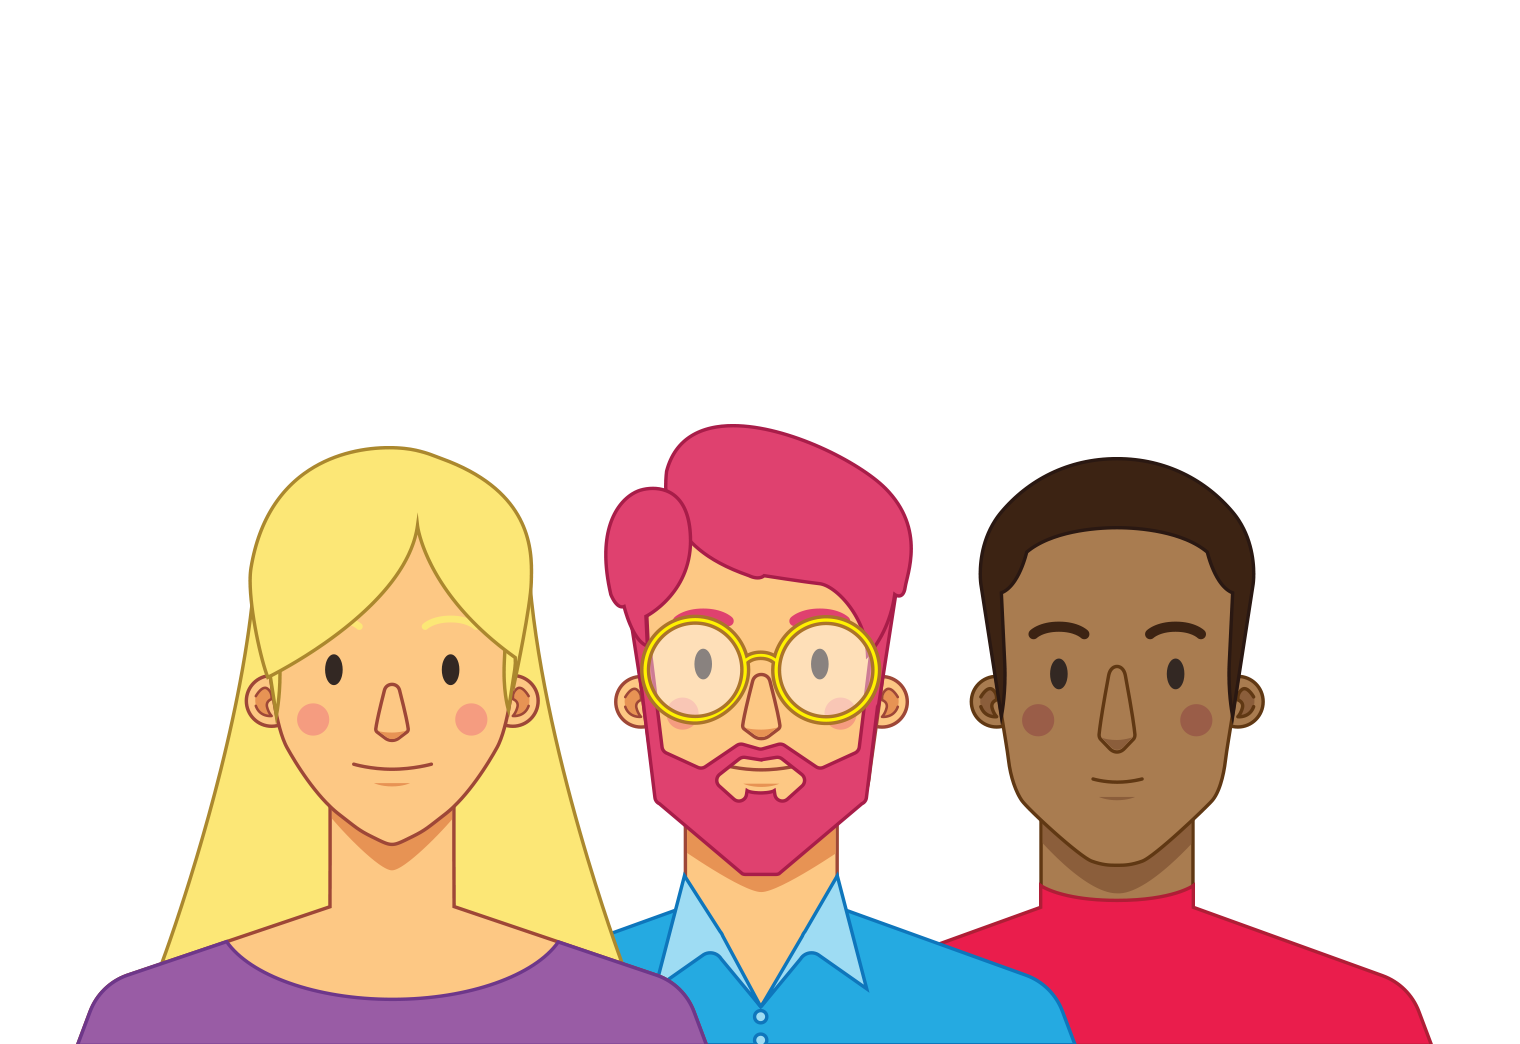 The Yay.com Free VoIP Trial